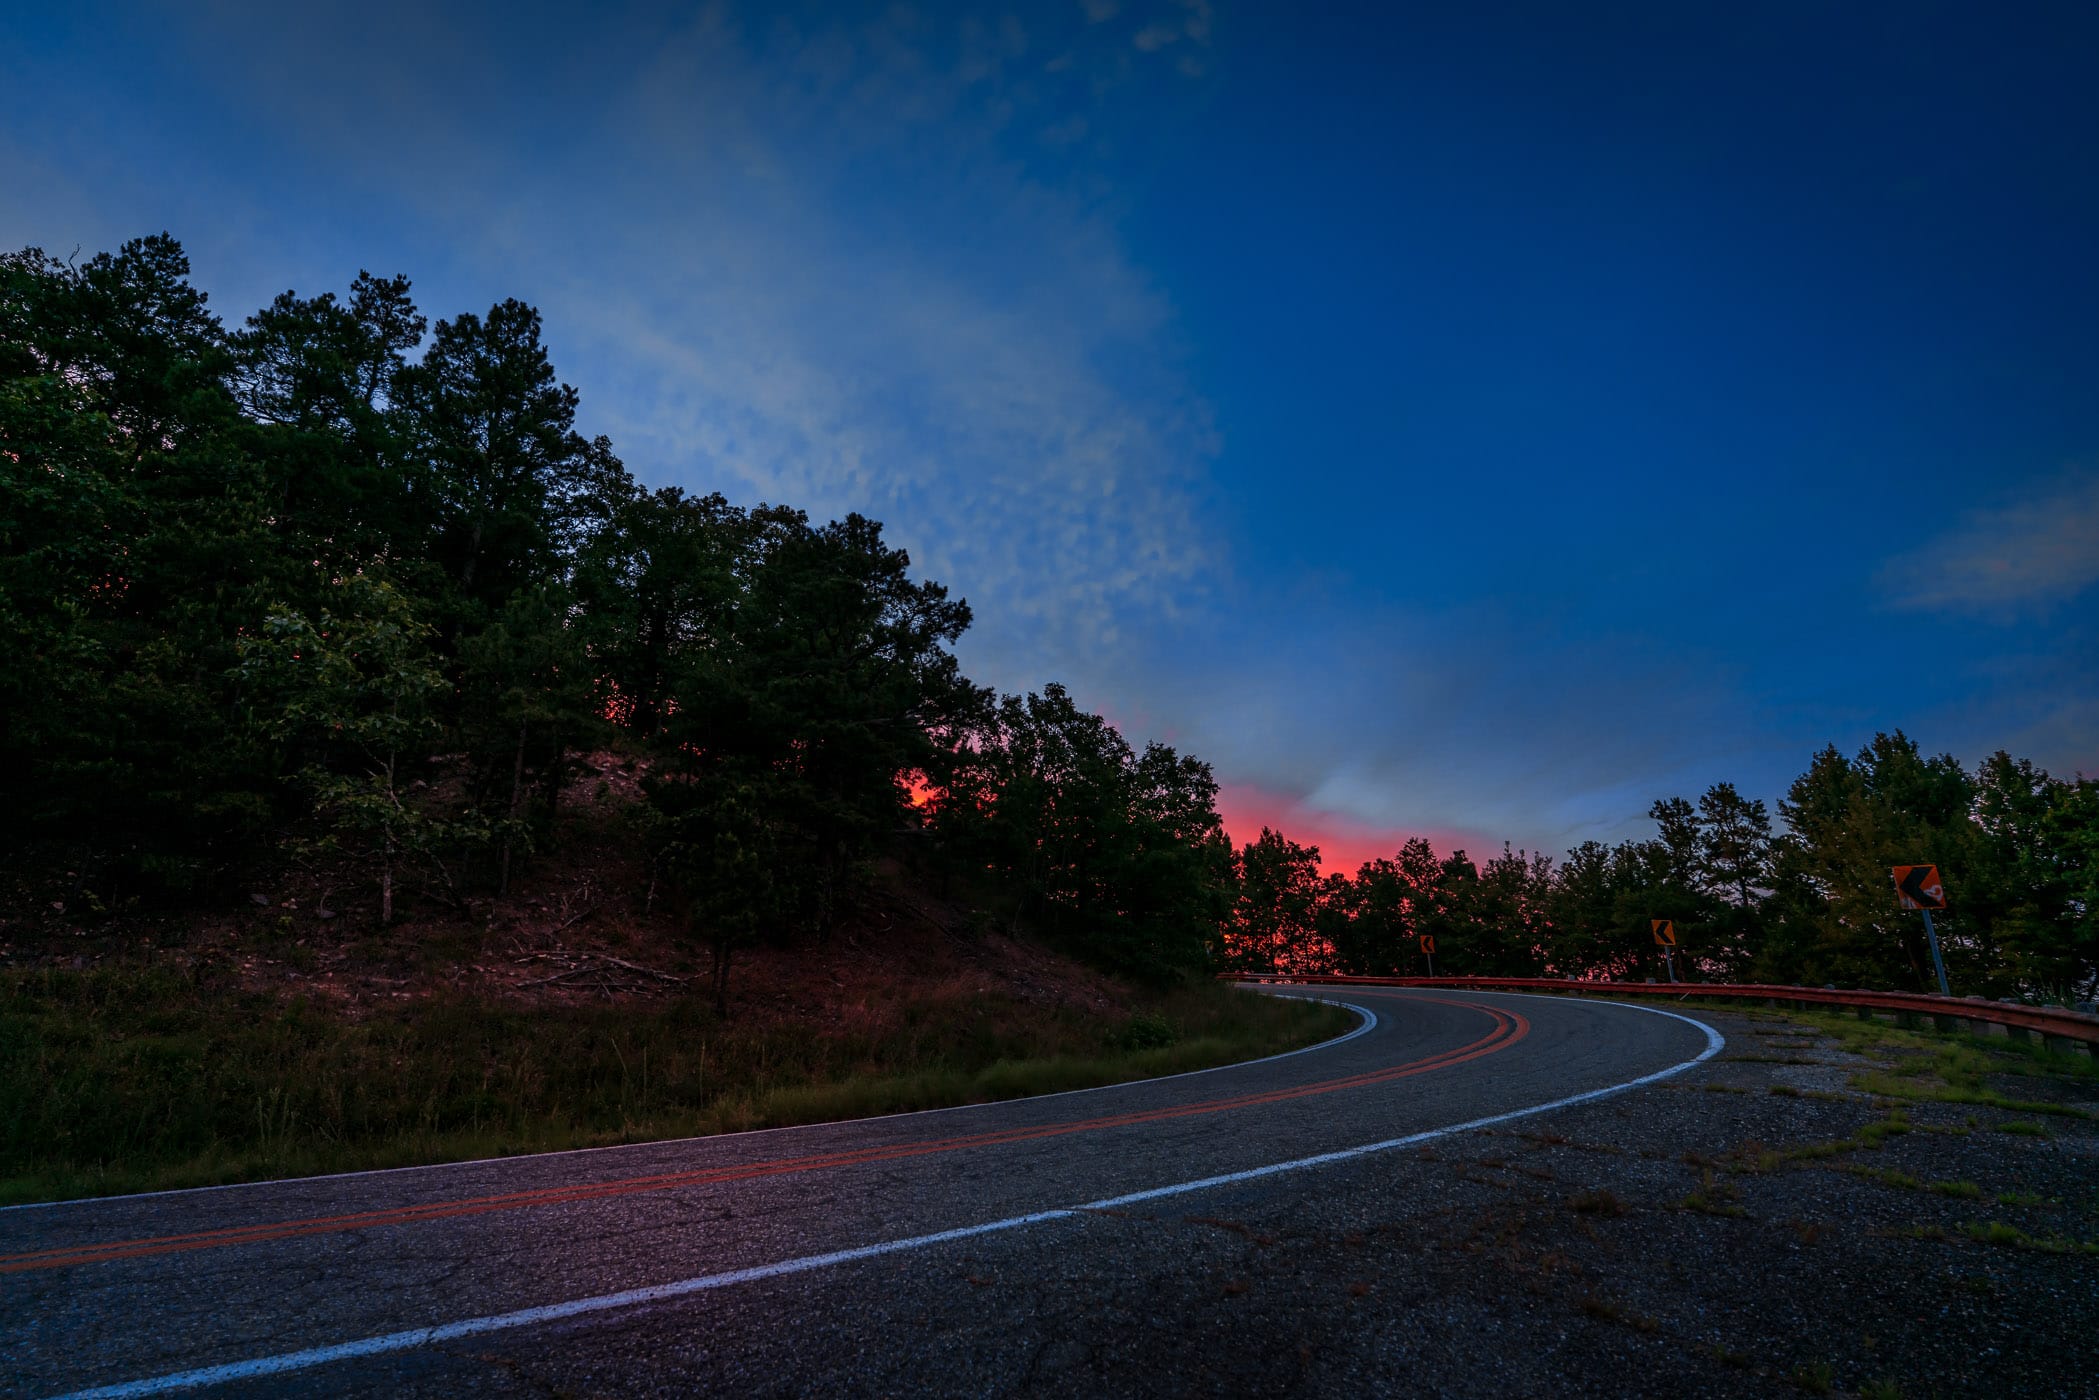 The Talimena National Scenic Byway twists through the Ouachita National Forest towards the setting sun near Mena, Arkansas.